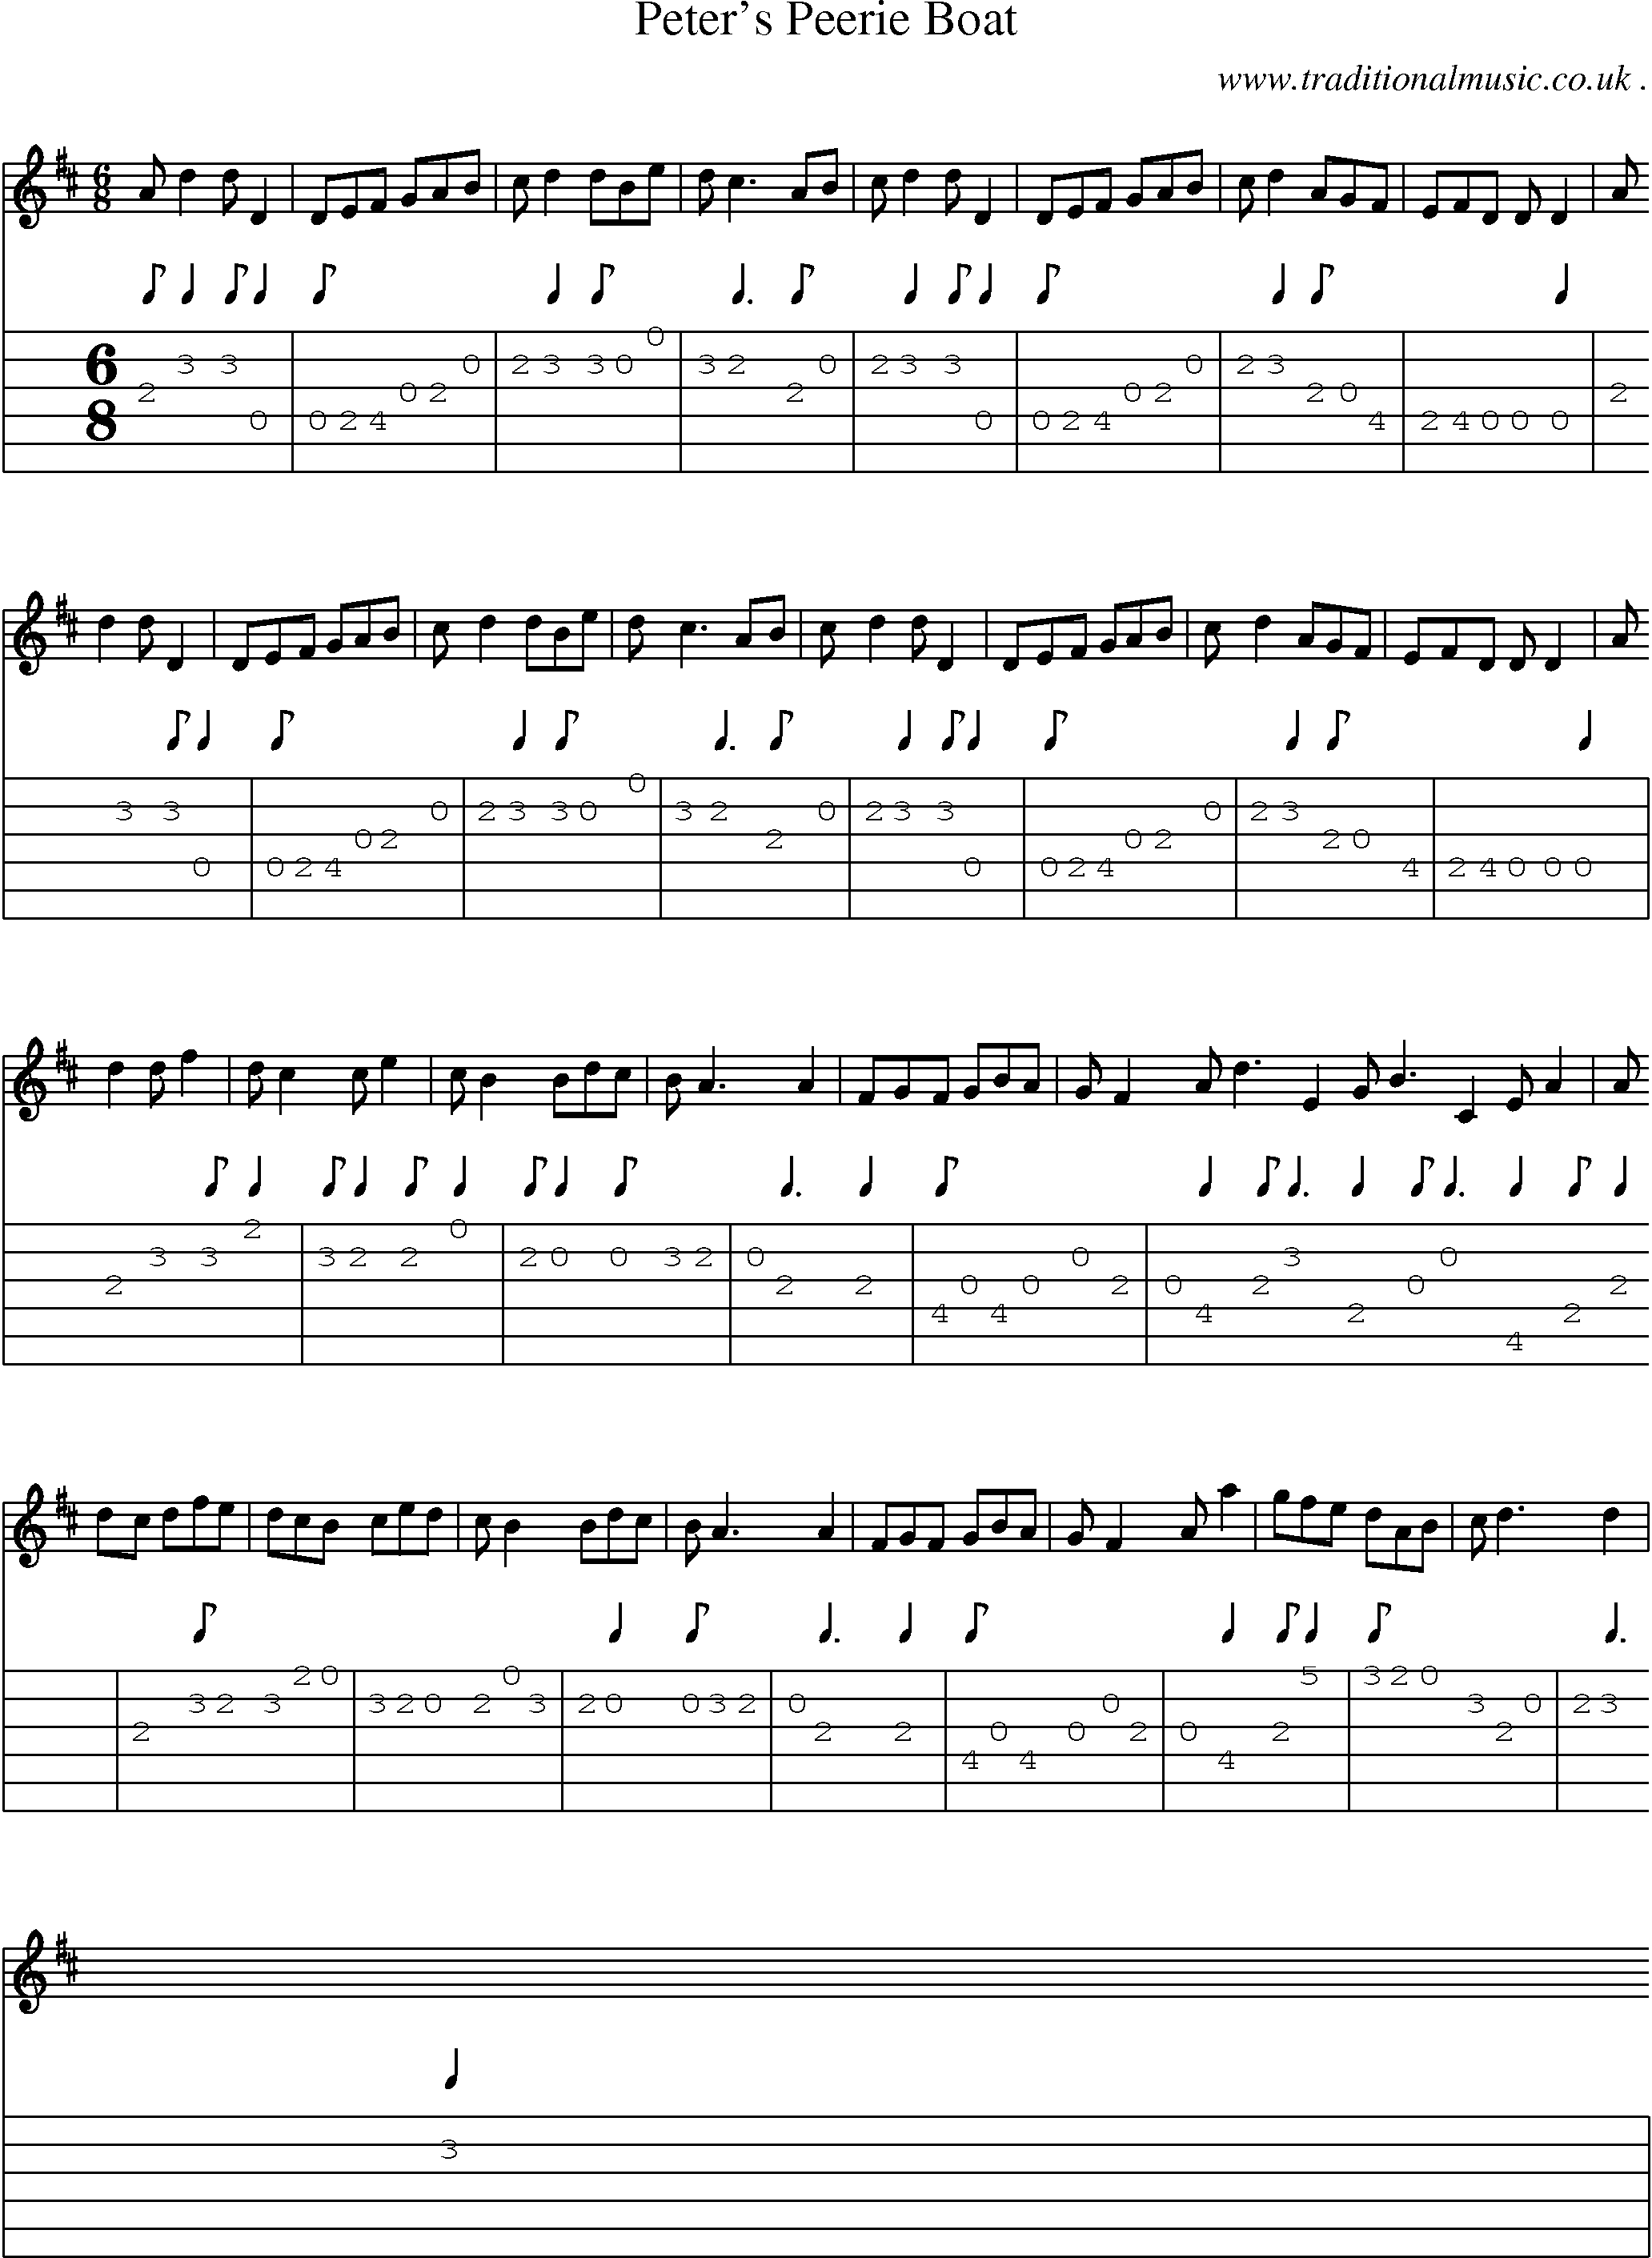 Sheet-Music and Guitar Tabs for Peters Peerie Boat